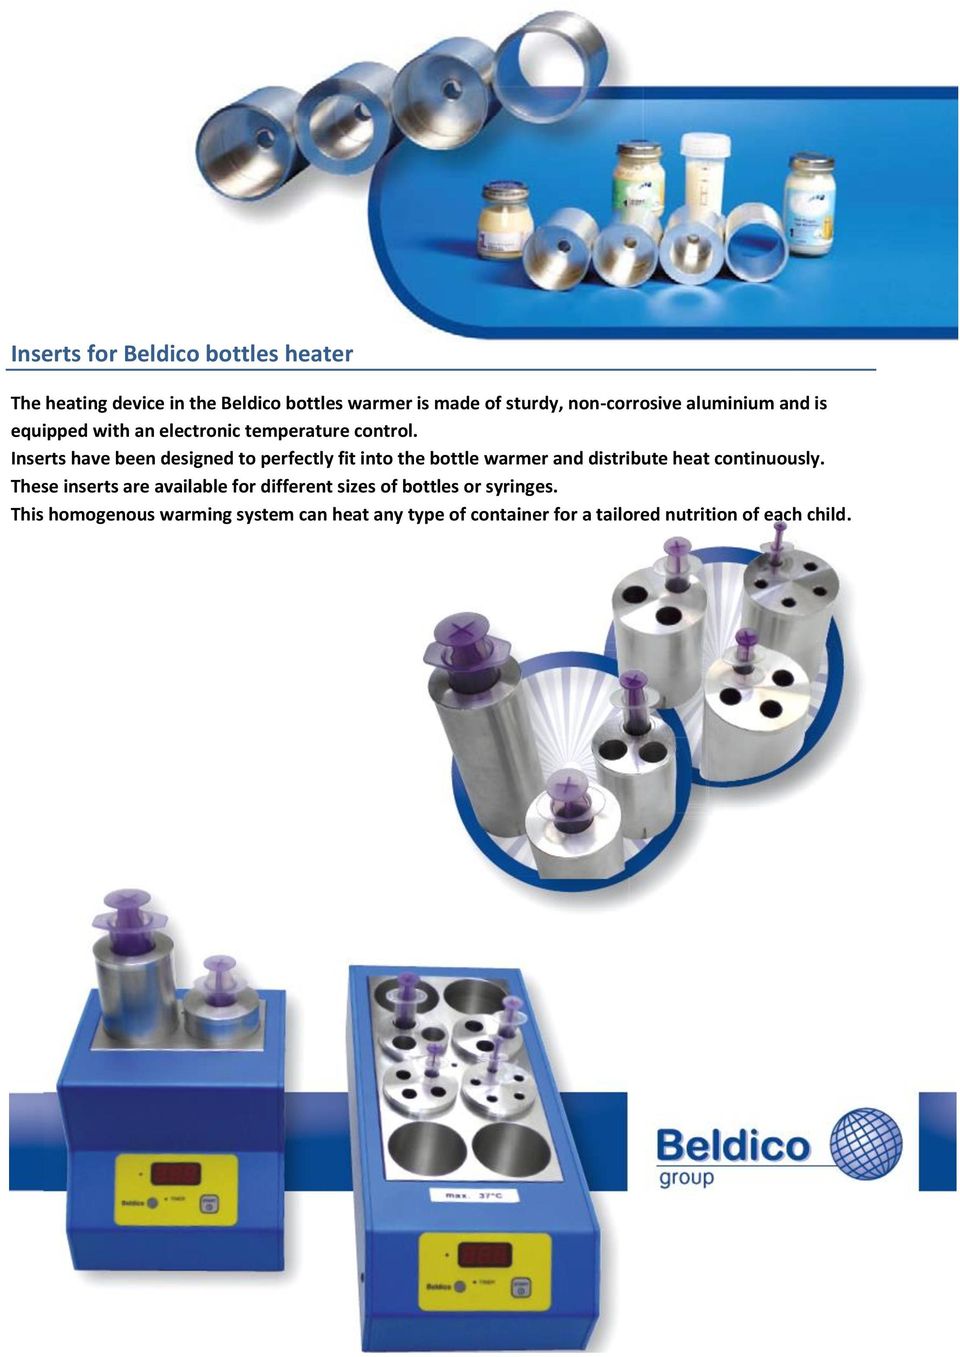 Inserts have been designed to perfectly fit into the bottle warmer and distribute heat continuously.